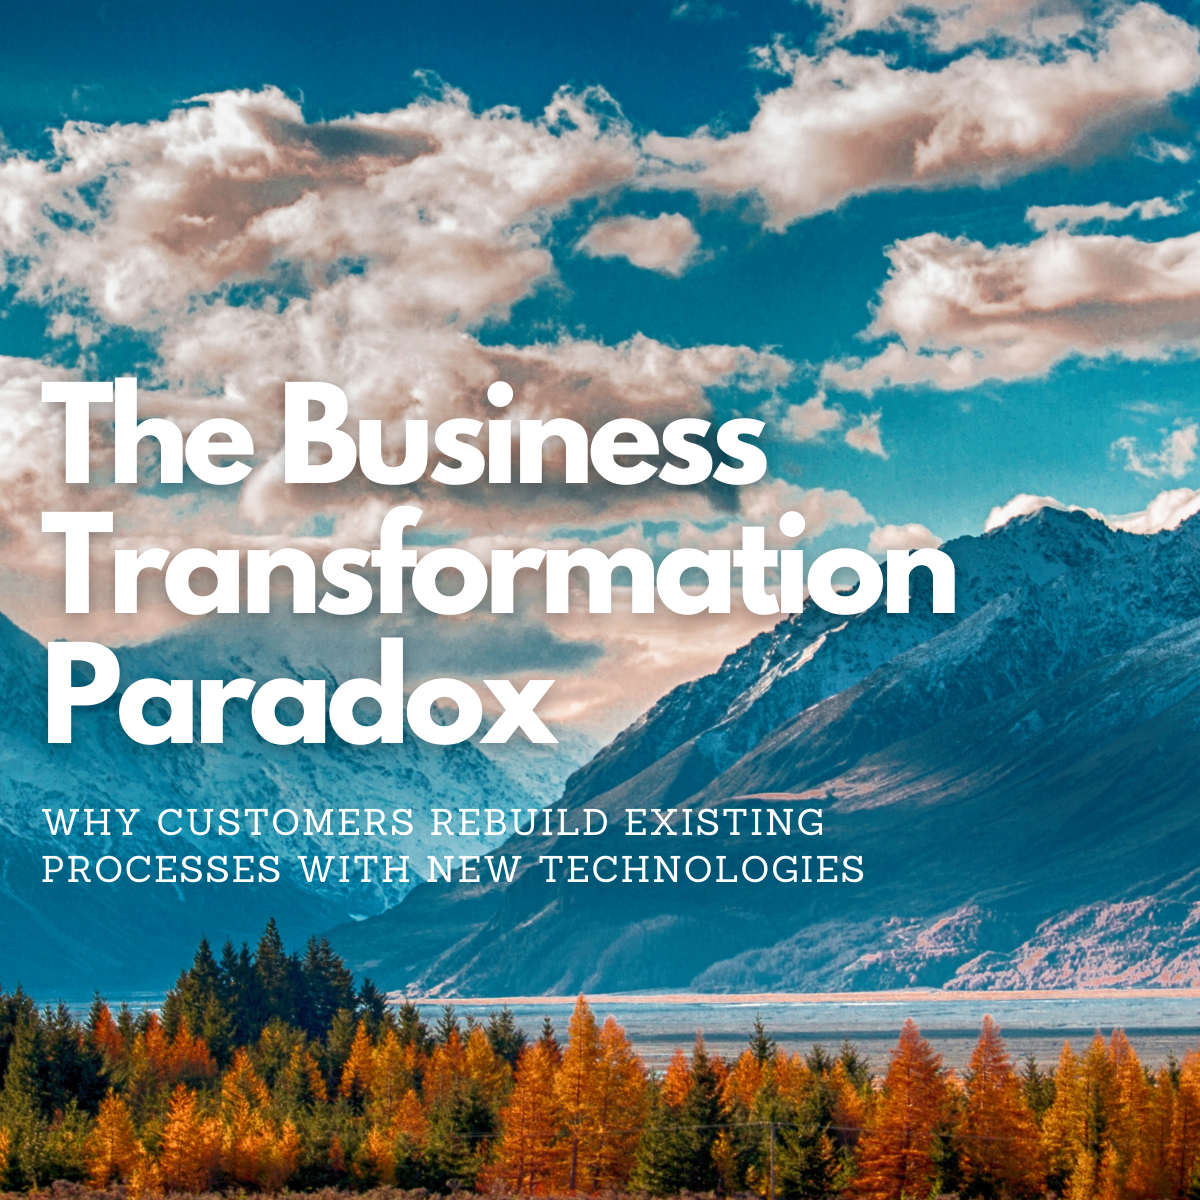 The Business Transformation Paradox